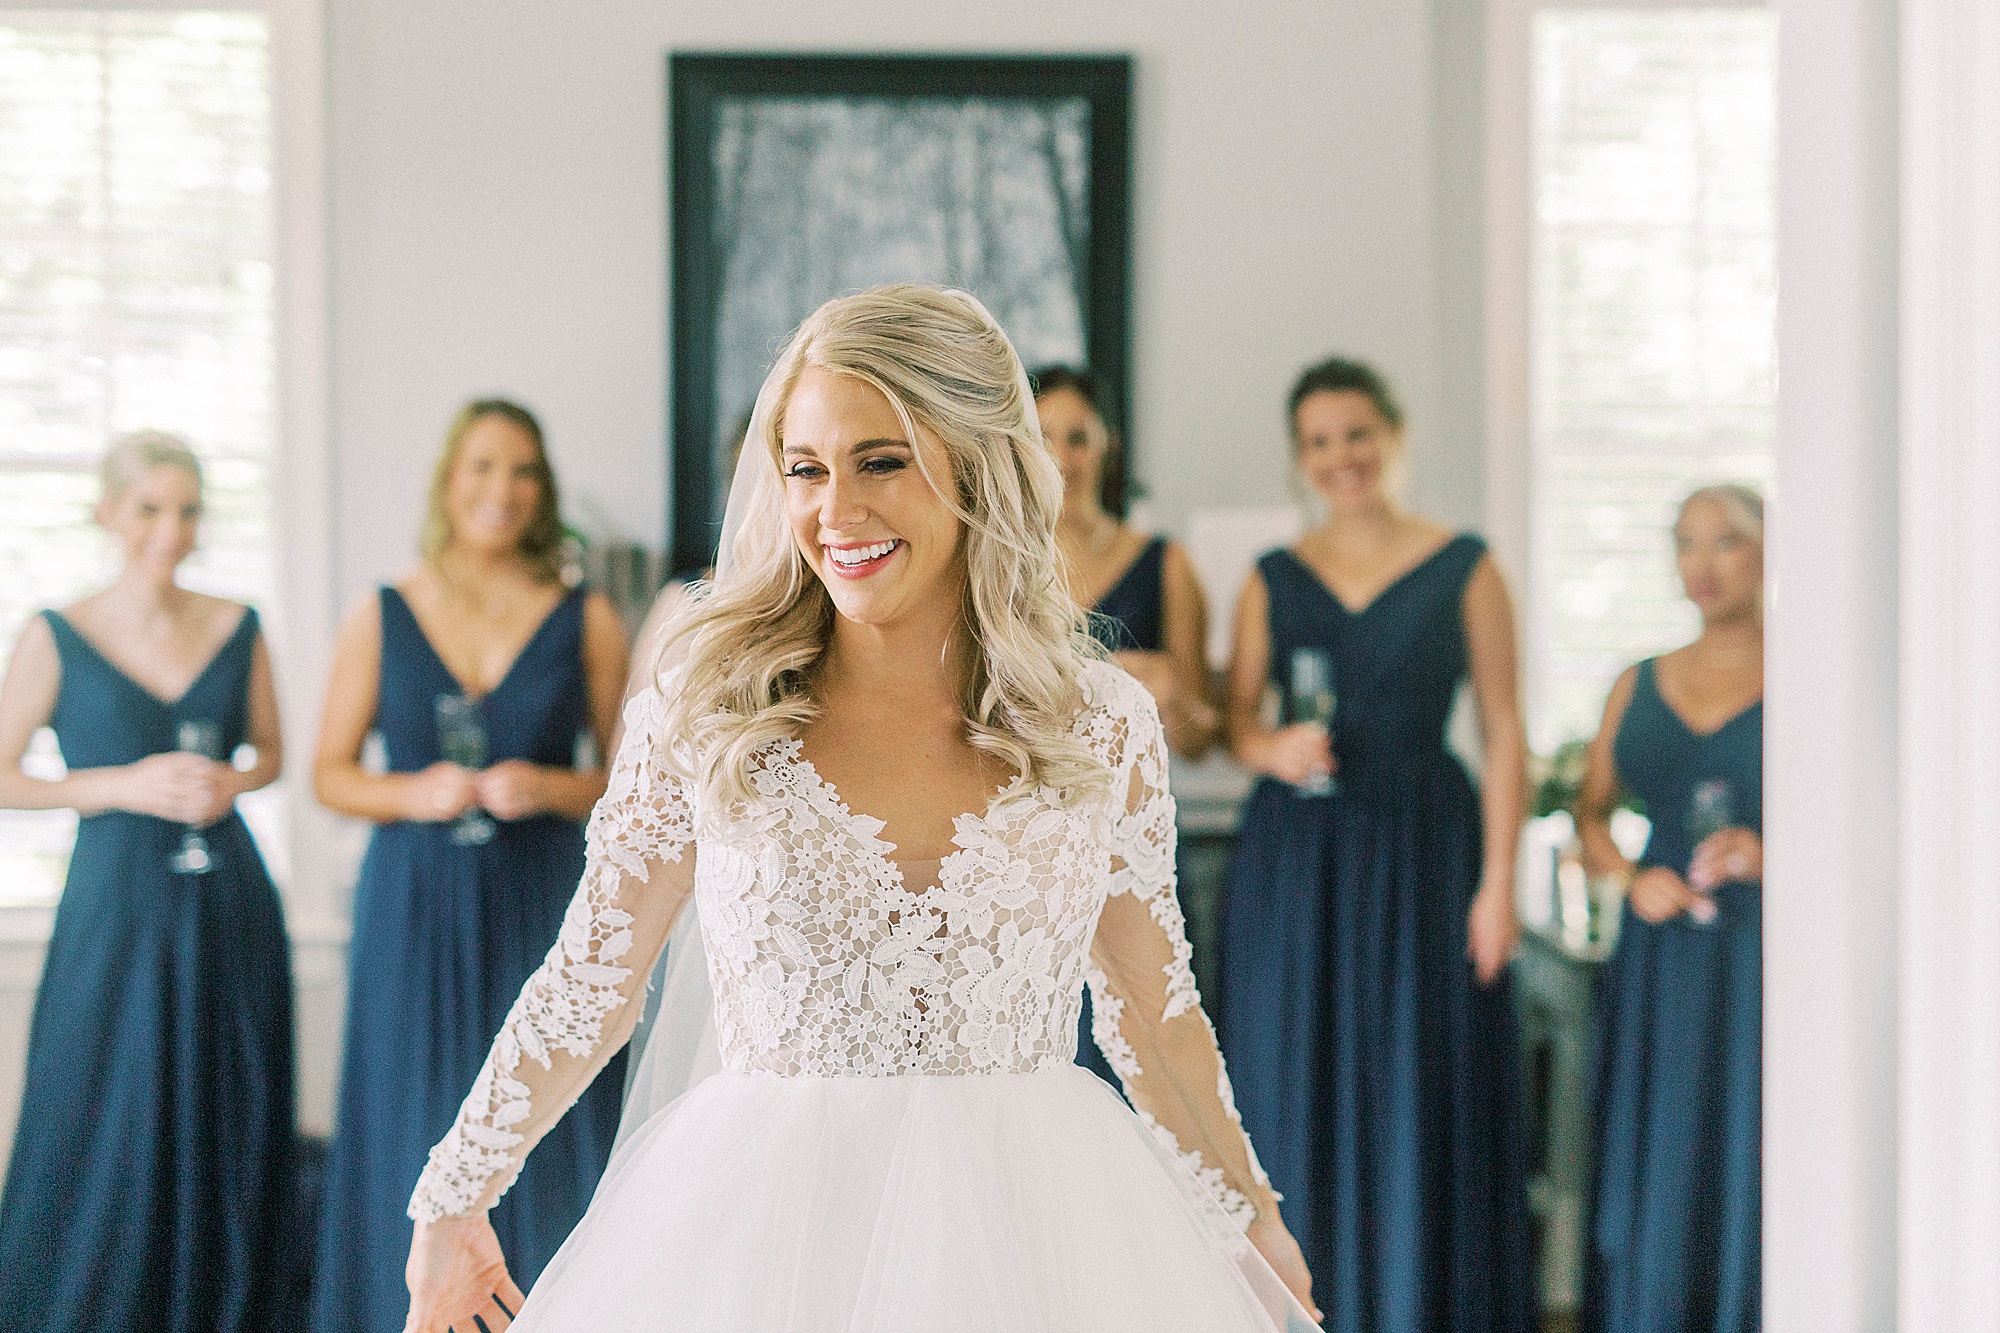 bride shoes Hayden Olivia bridal gown and veil to bridesmaids in navy blue gowns